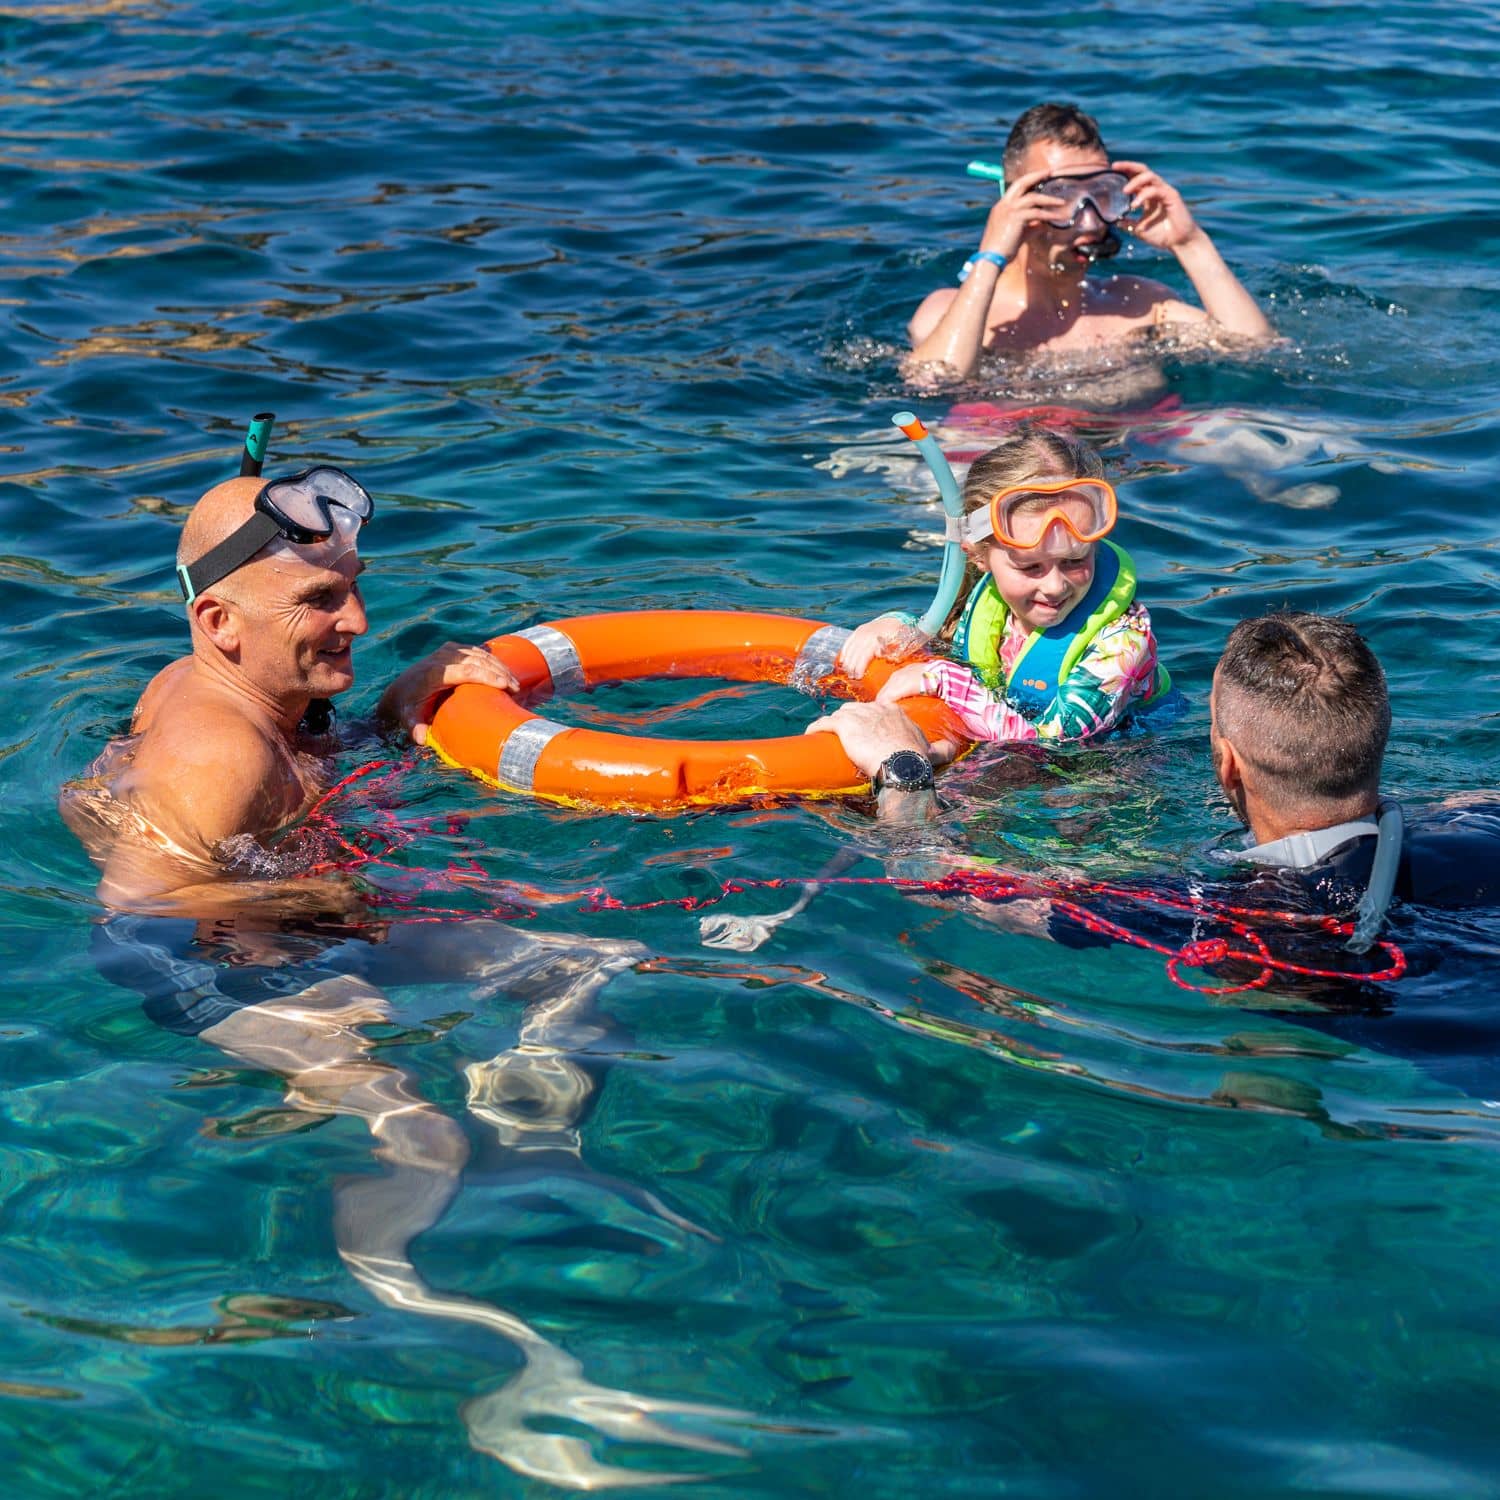 Guided snorkelling tour by Meet the Sea in Ibiza